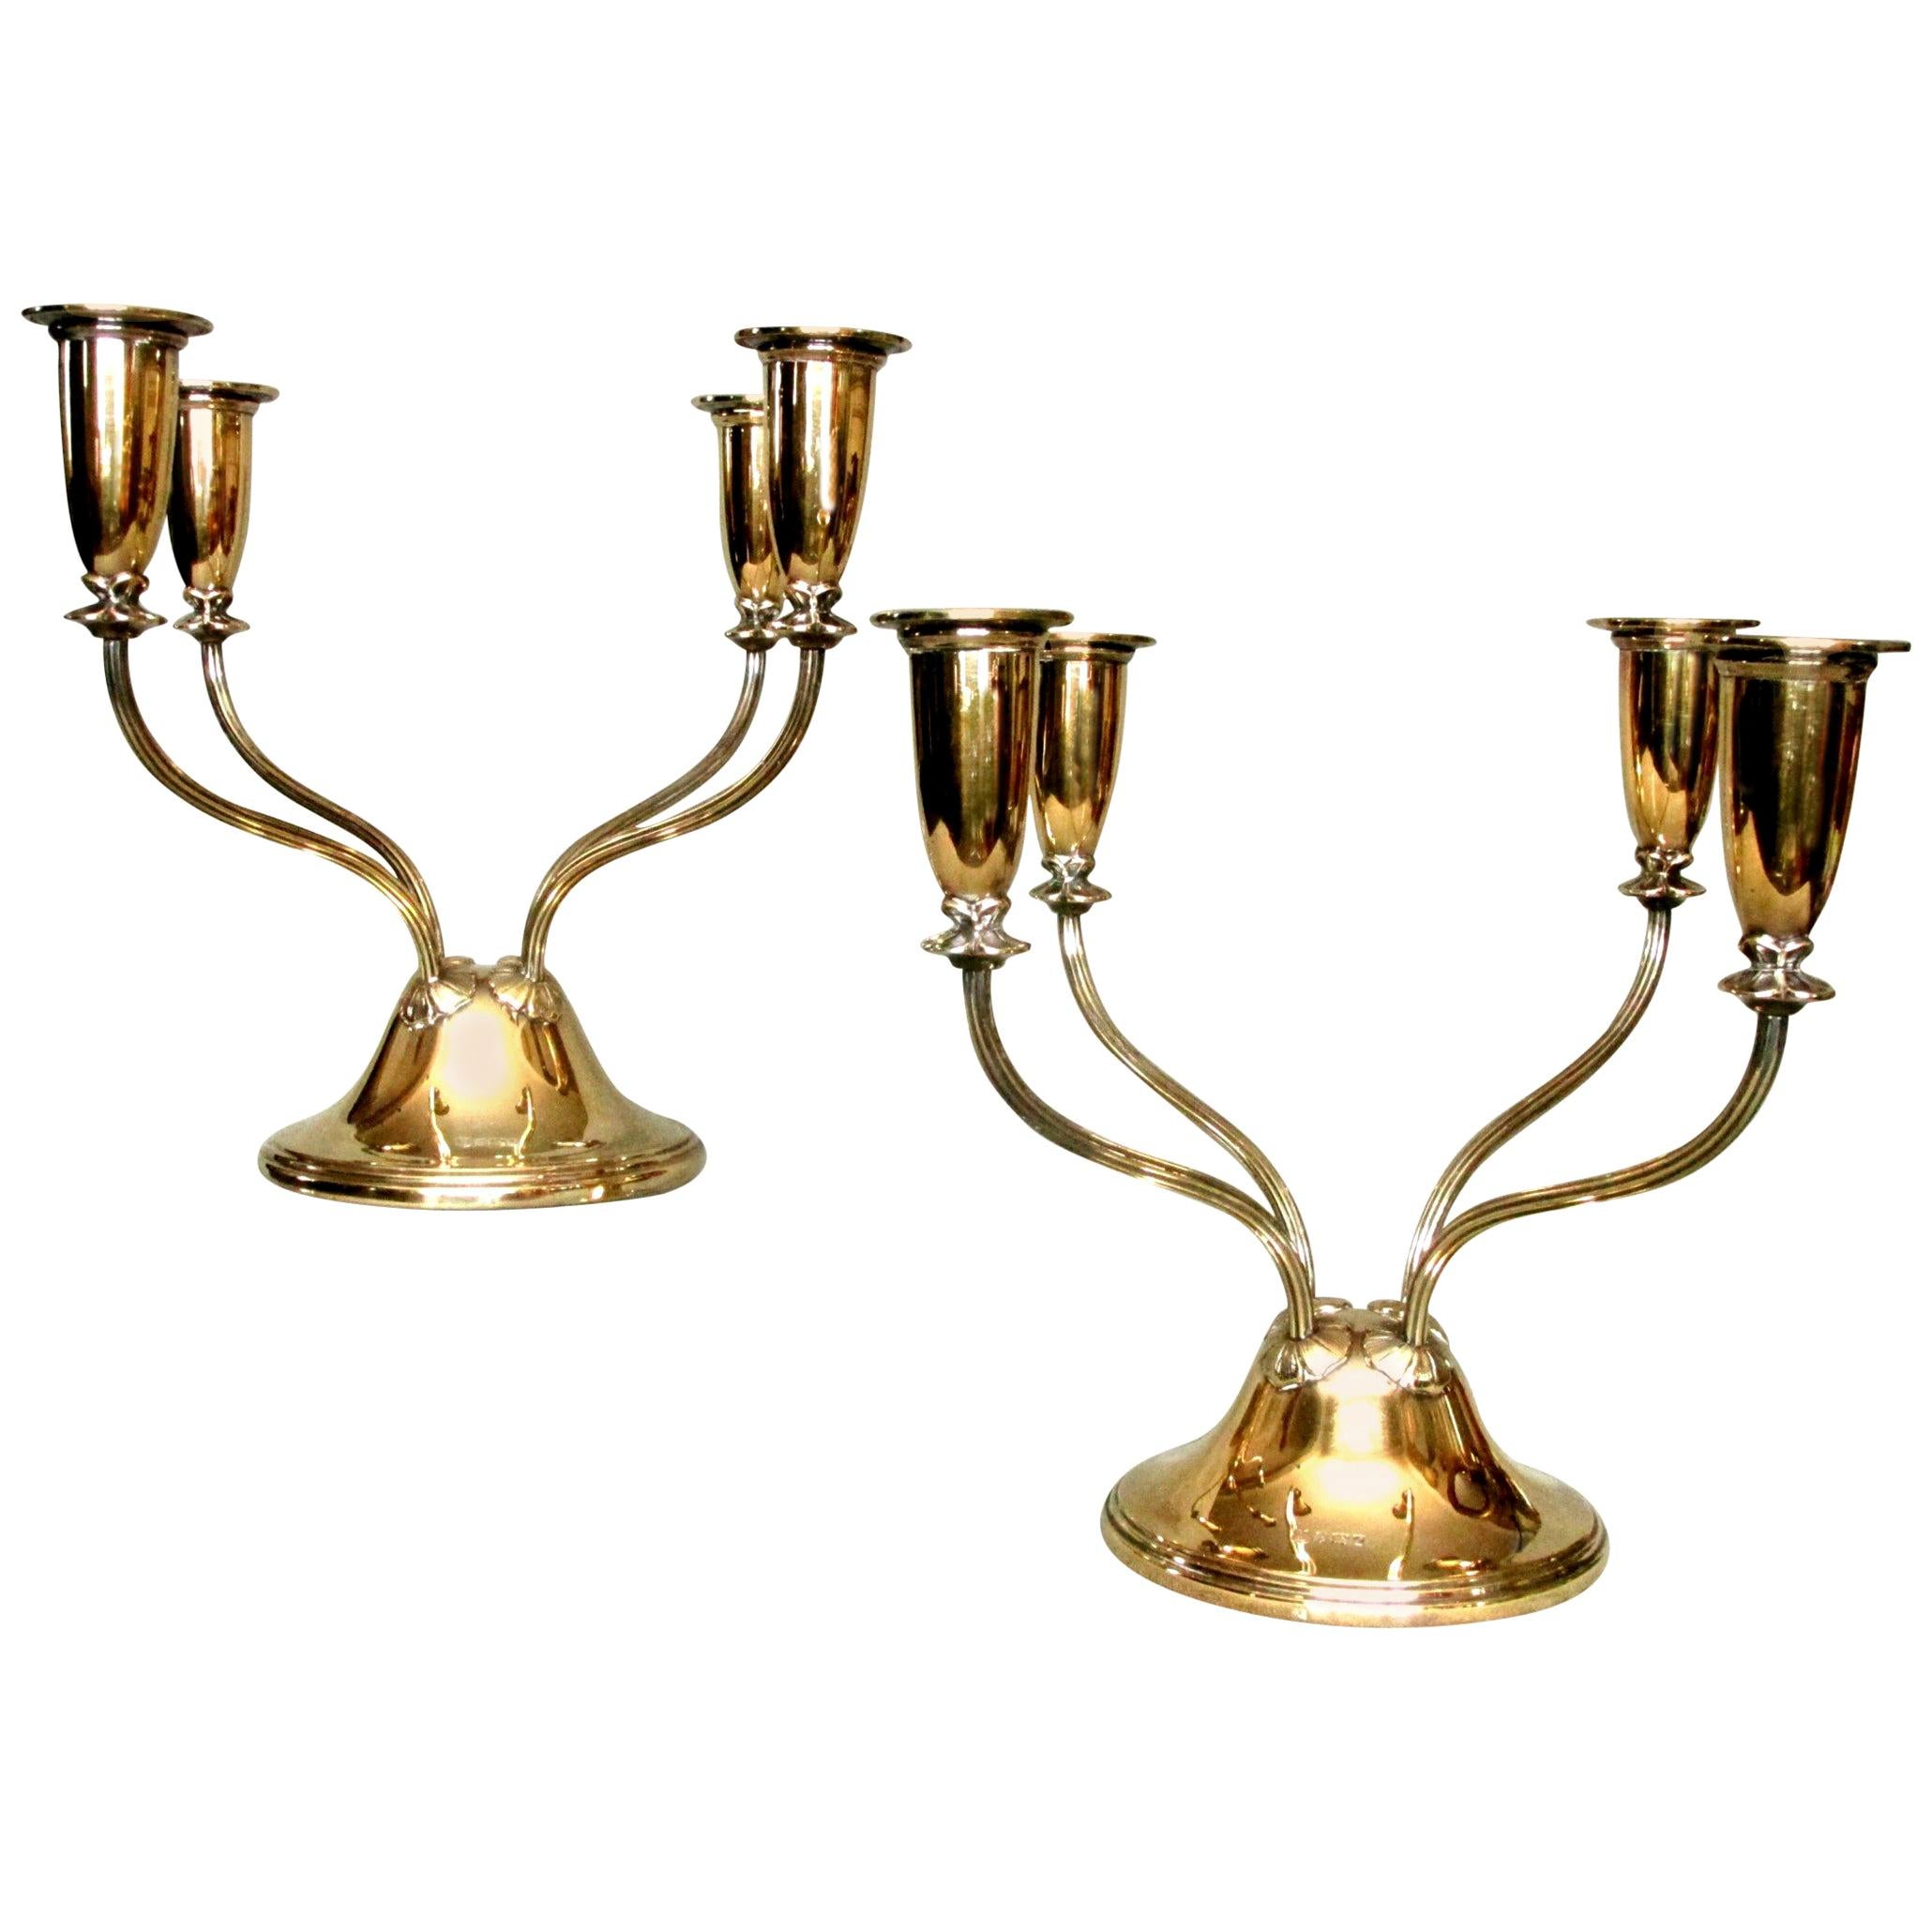 An Exceptional Pair of Mid-Century Modern Silver Gilt Candelabra, Dated 1960 For Sale